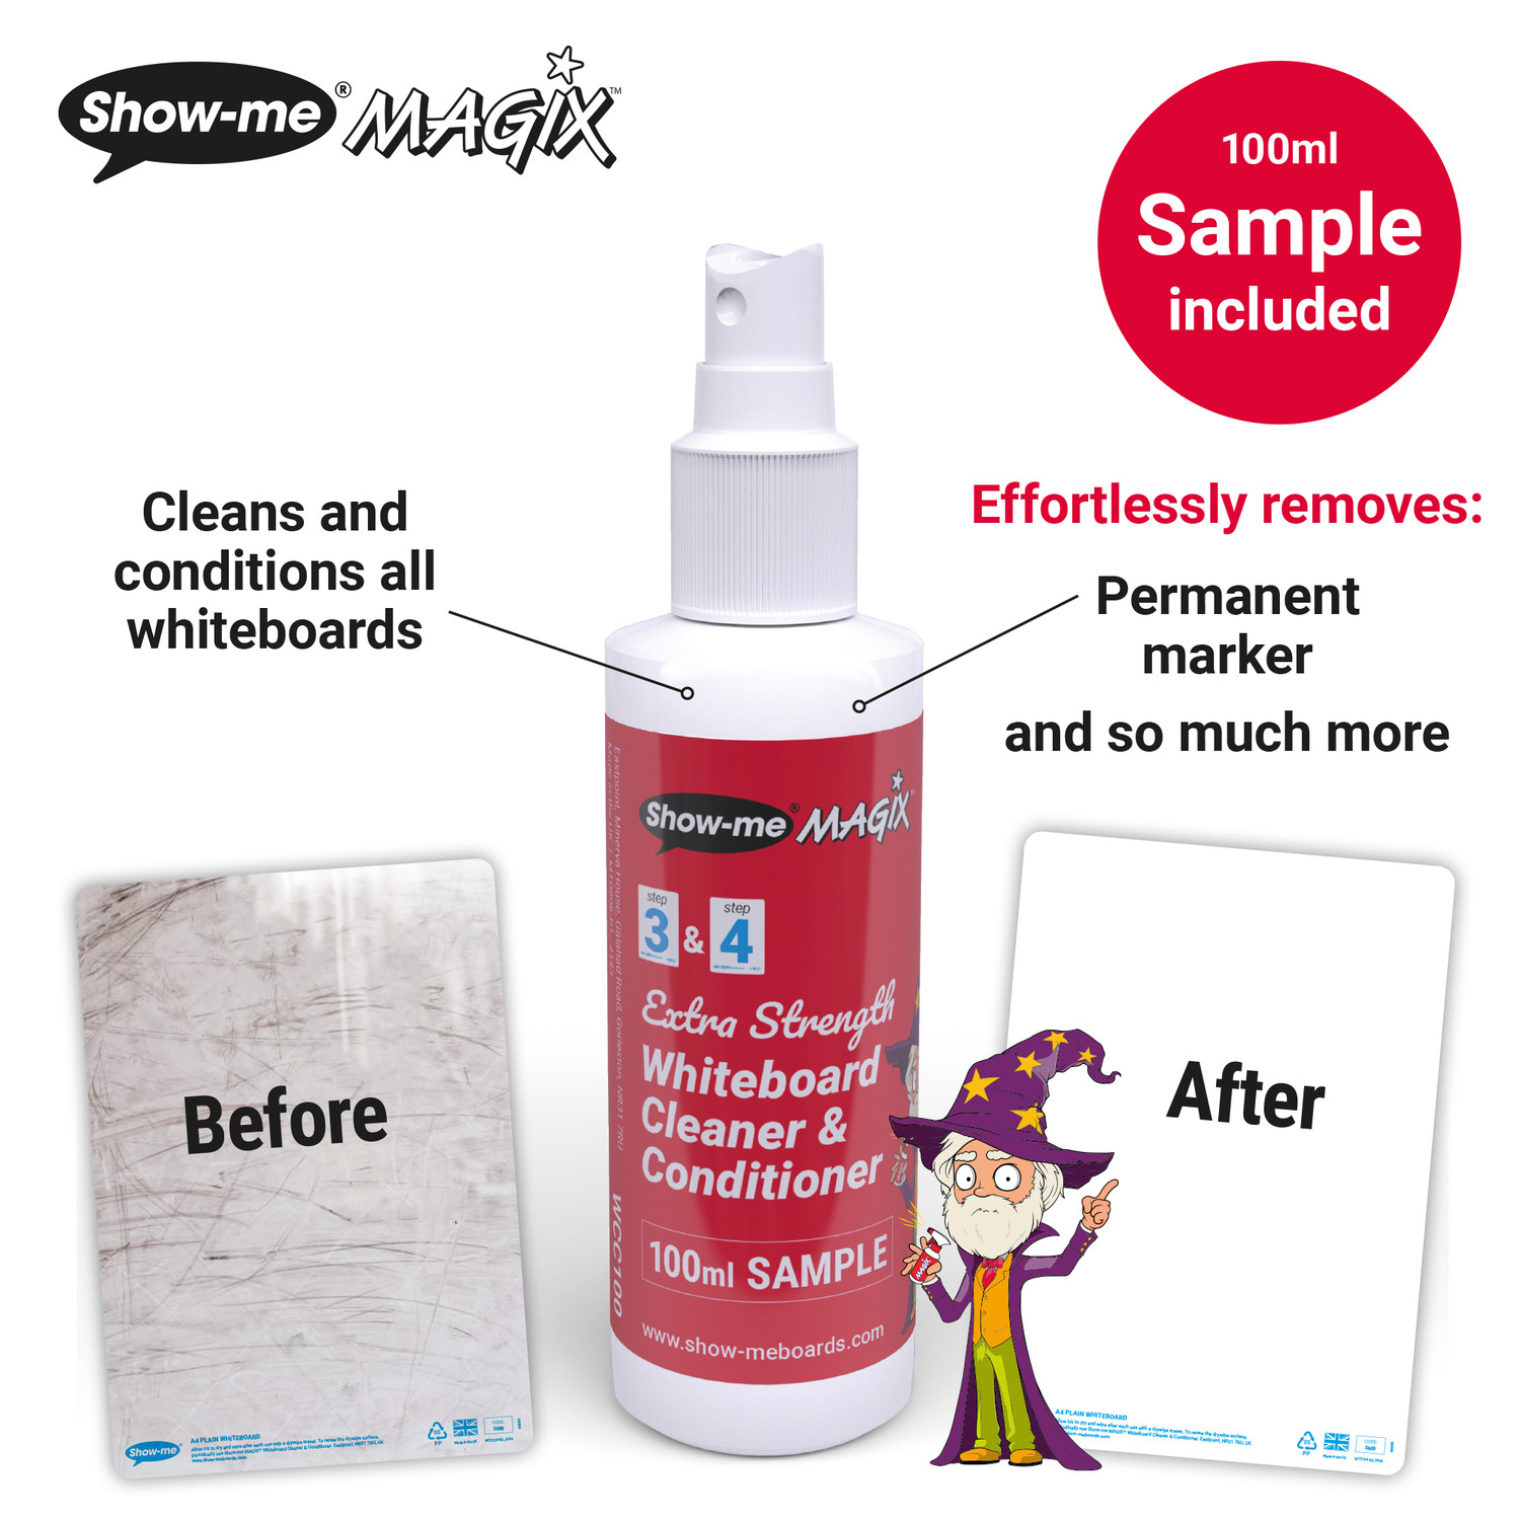 Show-me Magix Cleaner and Conditioner Sample Info